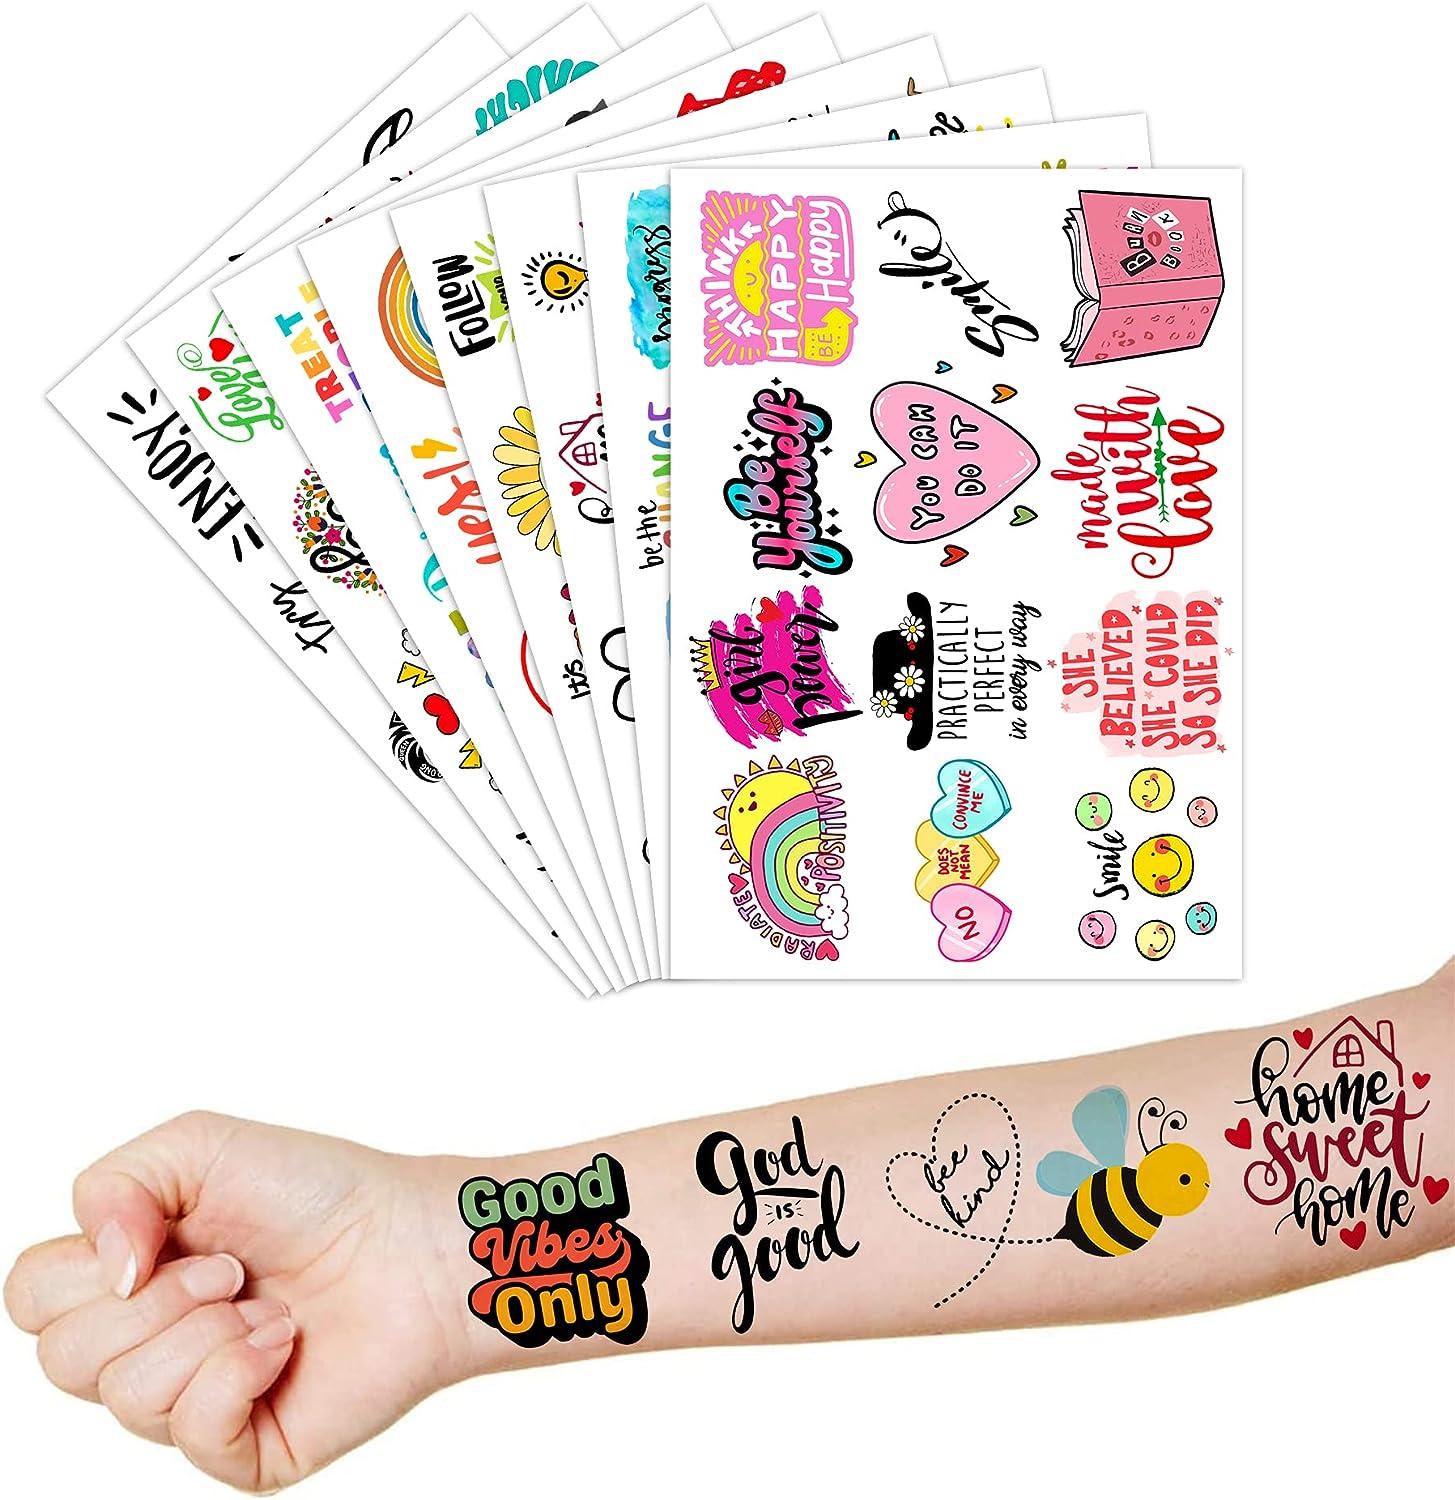 Rooting for You Motivational Quote Turnip Pun Water Resistant Temporary  Tattoo Set Fake Body Art Collection - Light Pink - Walmart.com